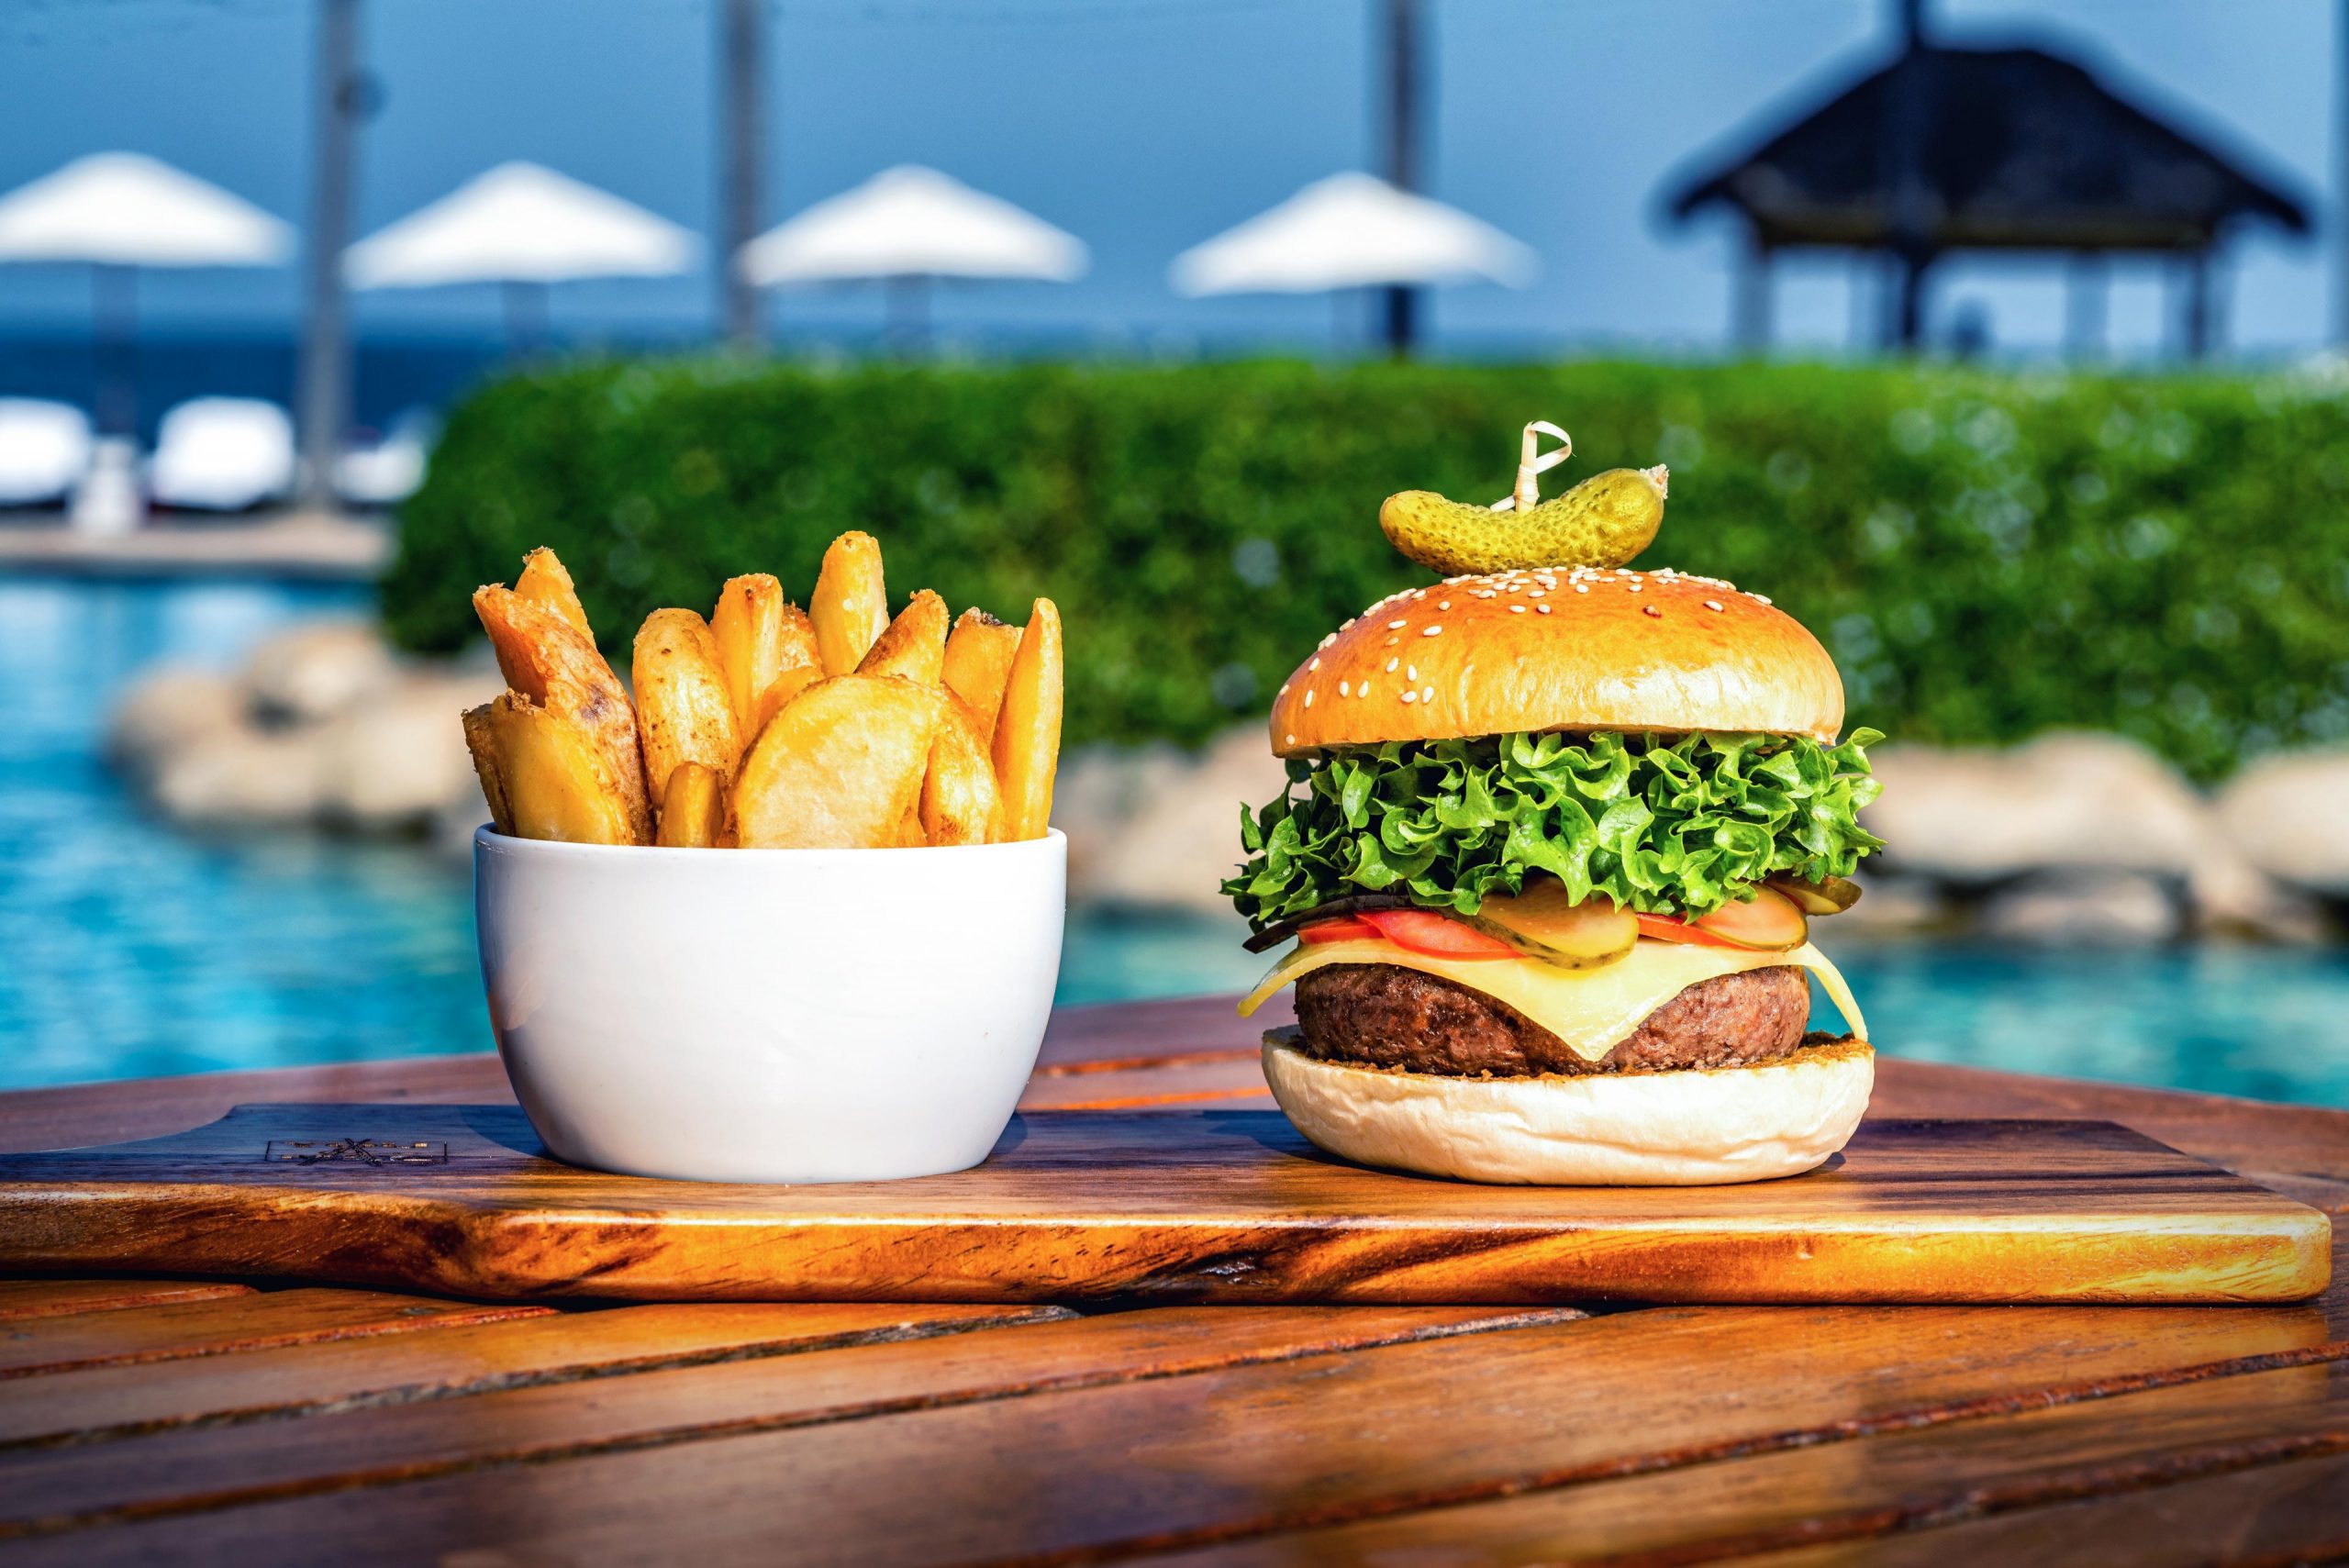 An enticing shot captured by Wright Content, showcasing a delectable burger and fries served poolside at a luxurious resort in Thailand. This image was part of a lifestyle and food photography shoot for a prestigious hotel chain. Wright Content specializes in capturing mouthwatering food scenes.